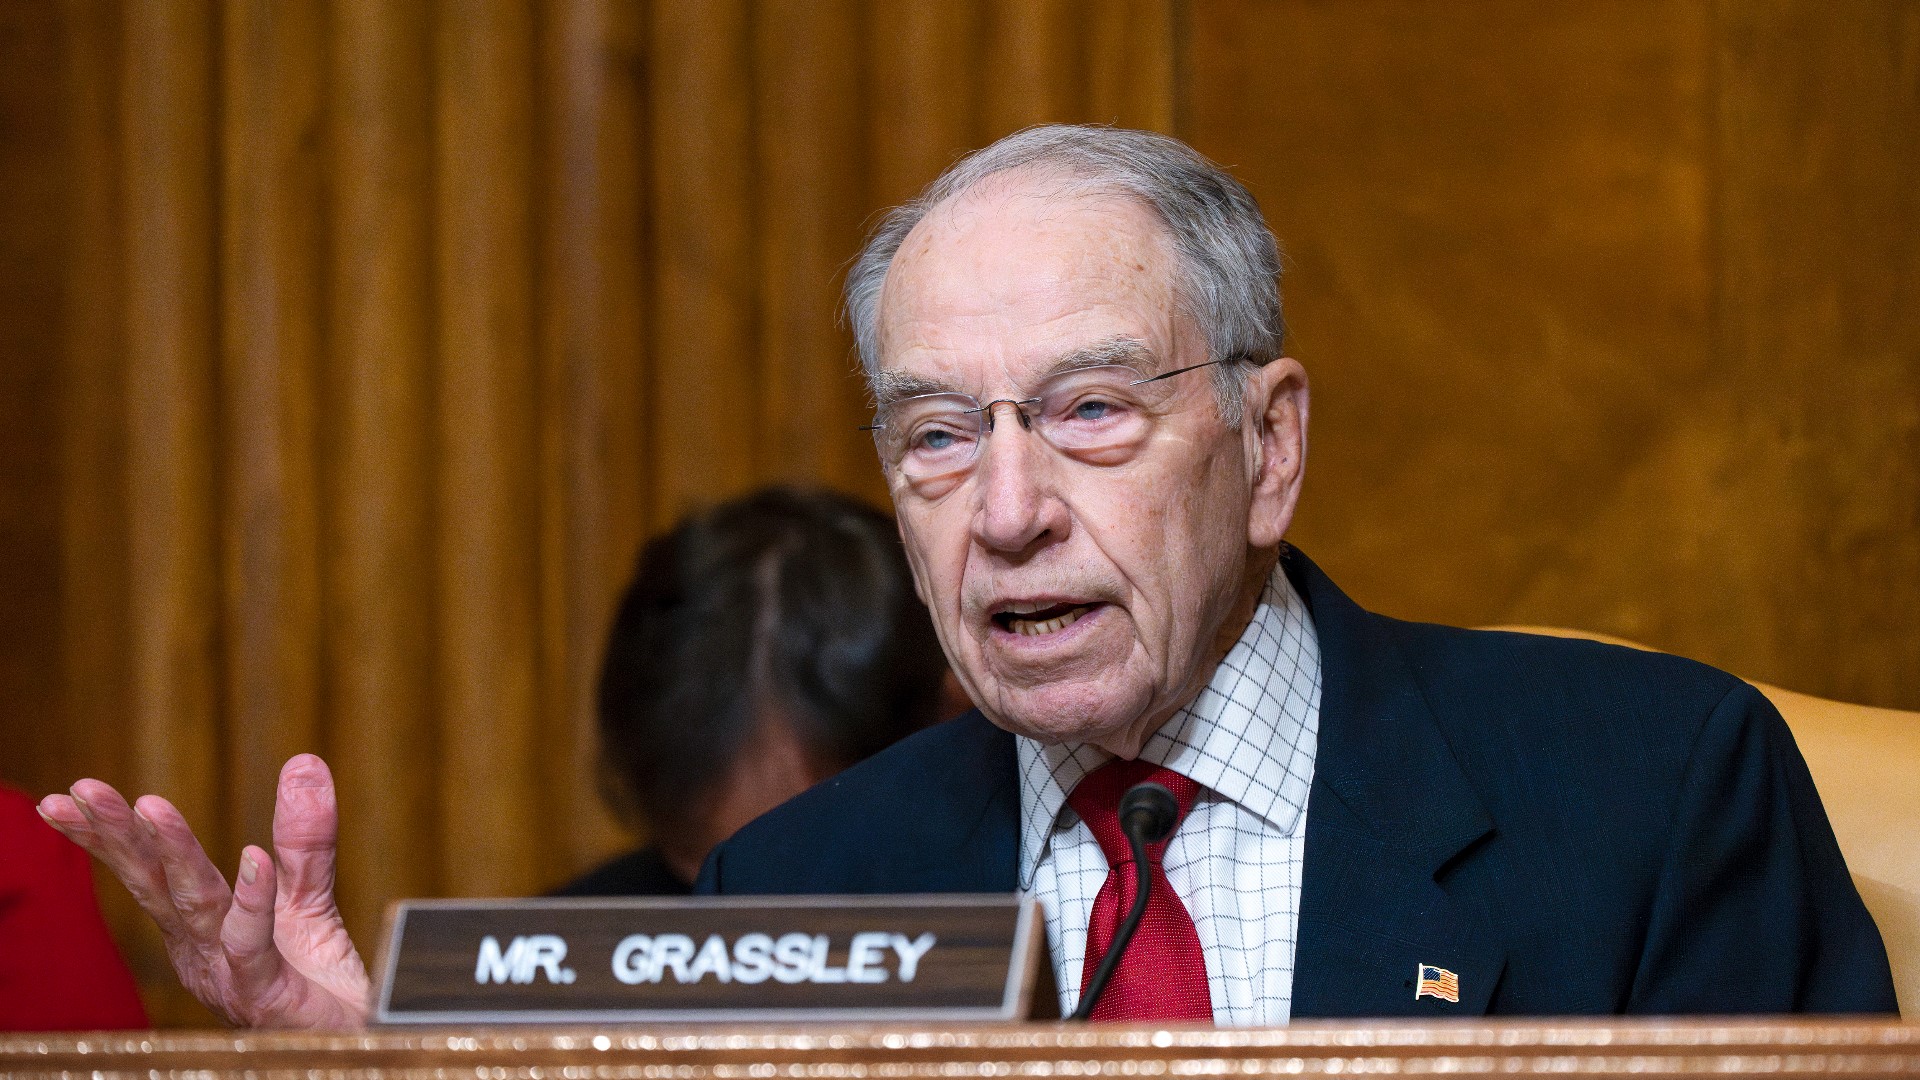 Grassley, 90, will return to work “as soon as possible following doctors' orders,” his office said in a statement.